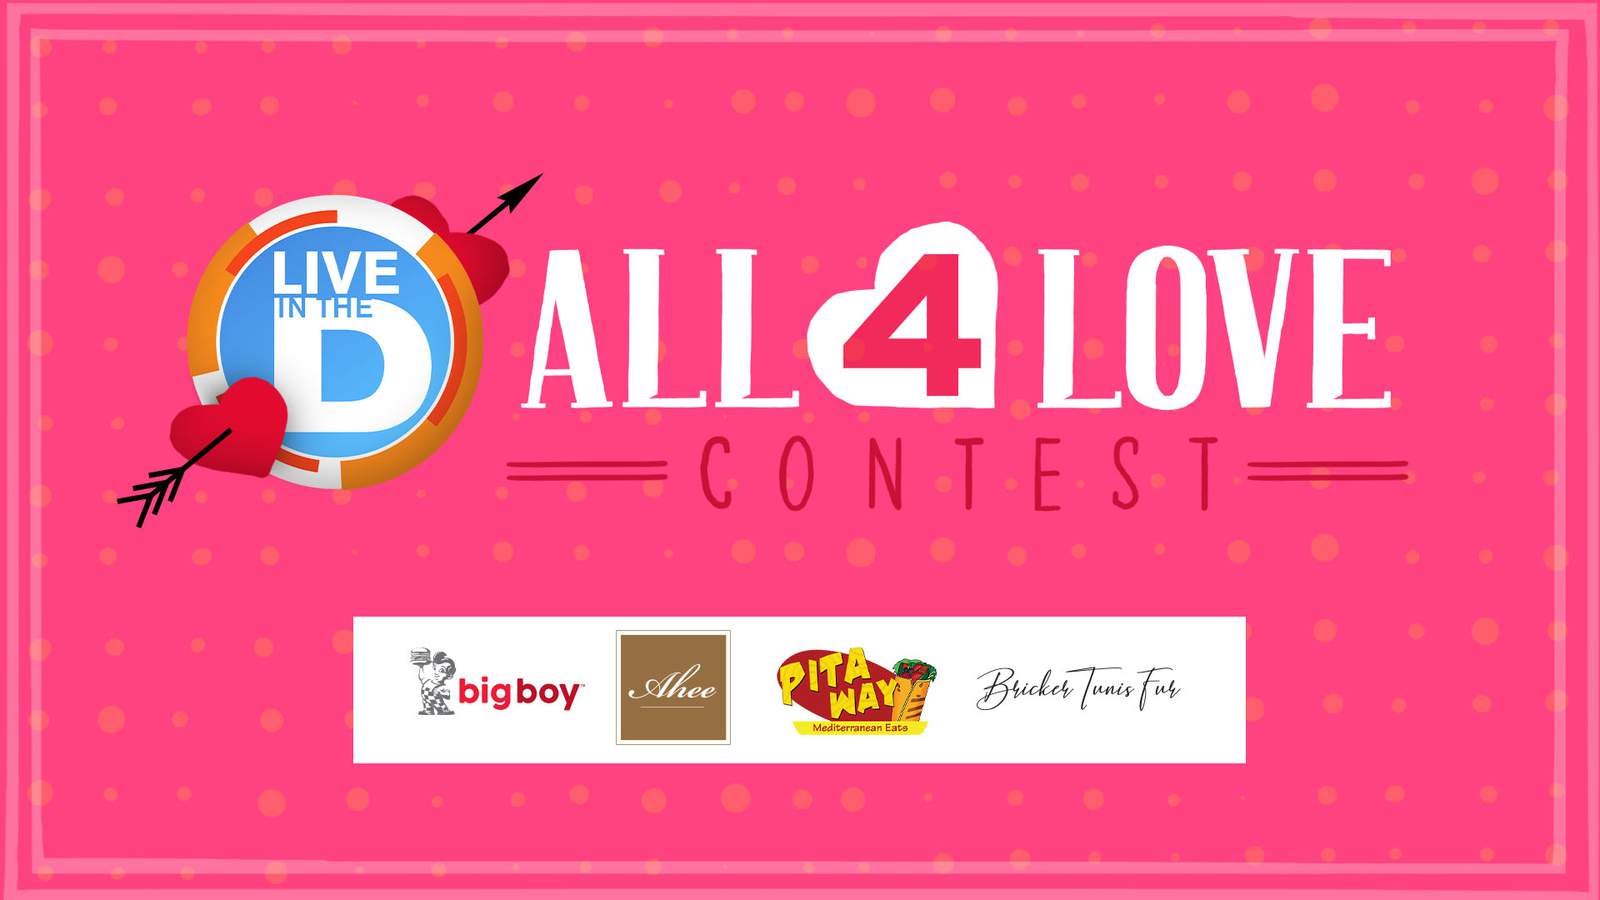 This is your final chance to win in our All 4 Love contest!